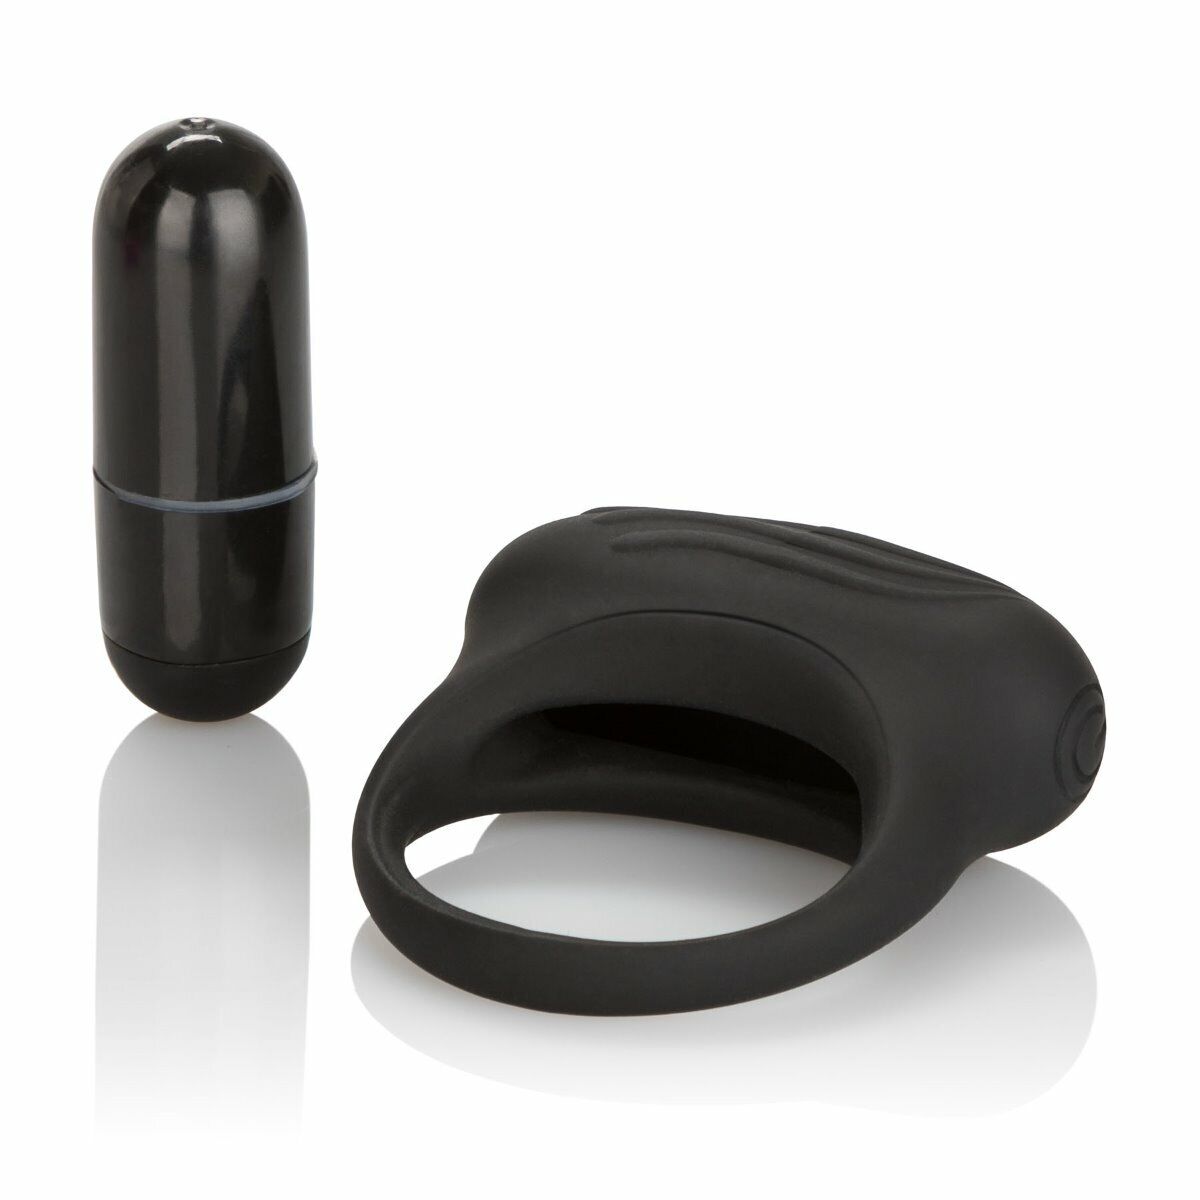 Waterproof Silicone Lover's Arouser Vibrating Penis Cock Ring Enhancer